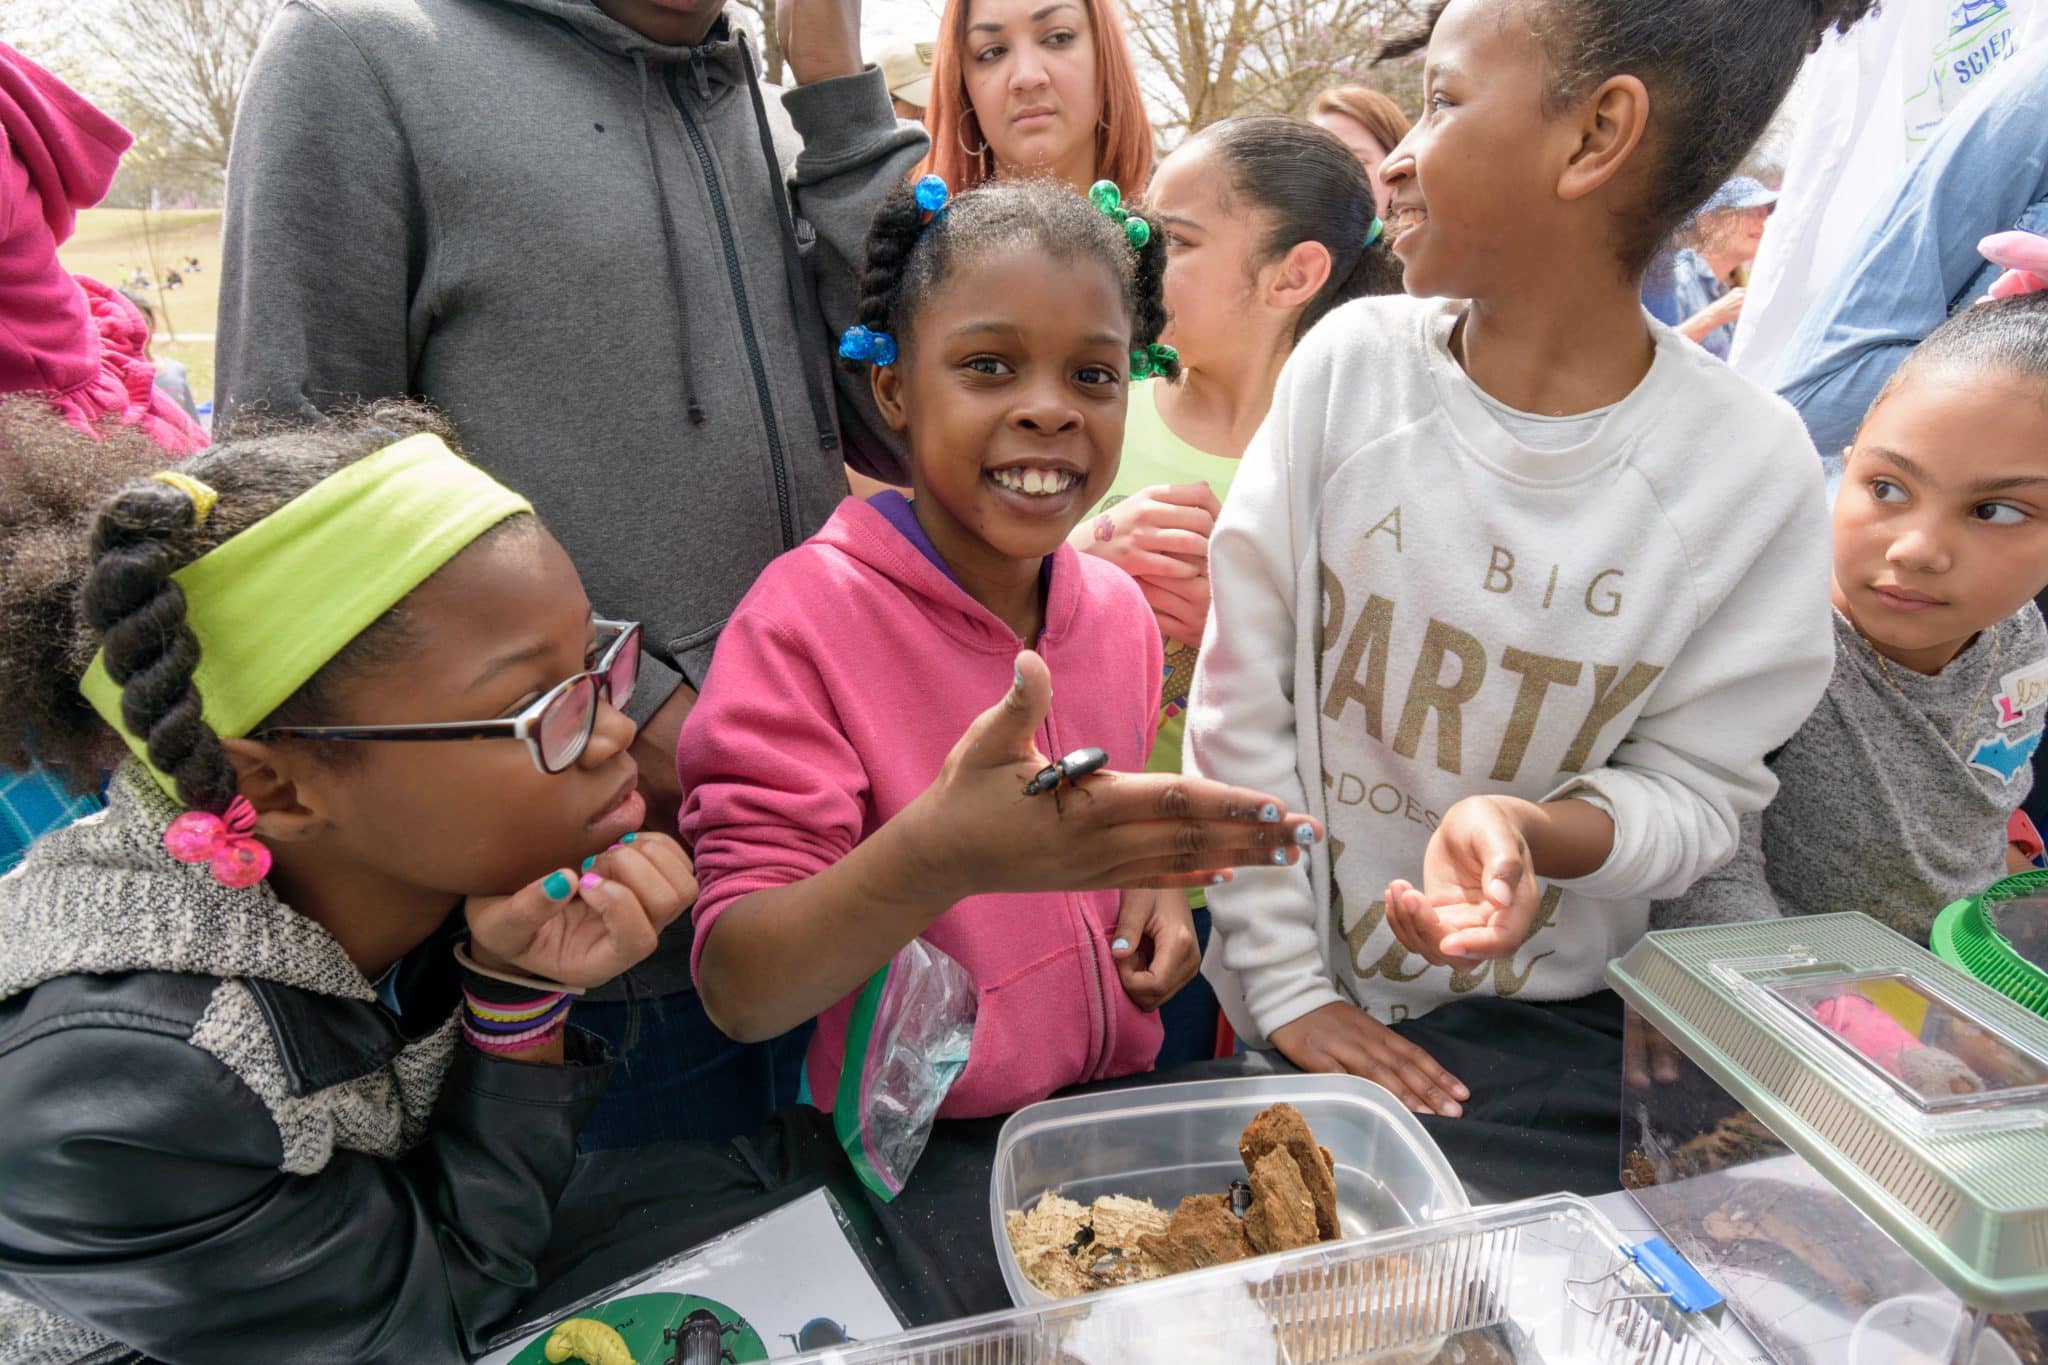 The Atlanta Science Festival returns with 150 events March 10-25